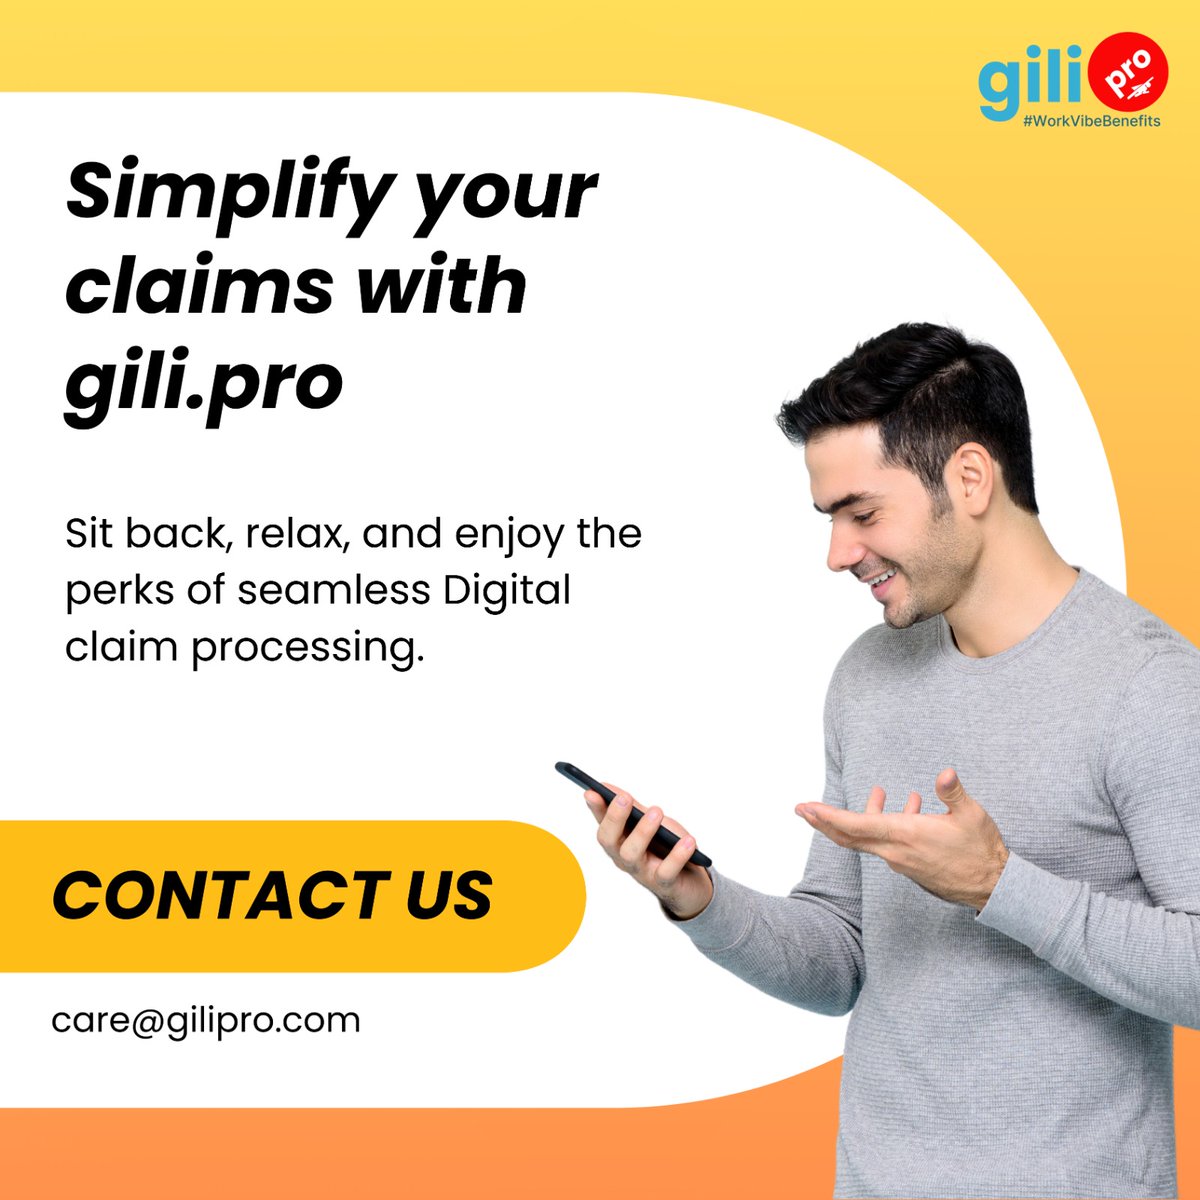 Experience #hasslefree #digitalclaim processing with gili.pro – because simplicity is the ultimate luxury. Enjoy effortless #claim processing at your fingertips.

#gilipro #claimprocess #workvibebenefits #wellness #employeewellness #employeebenefits